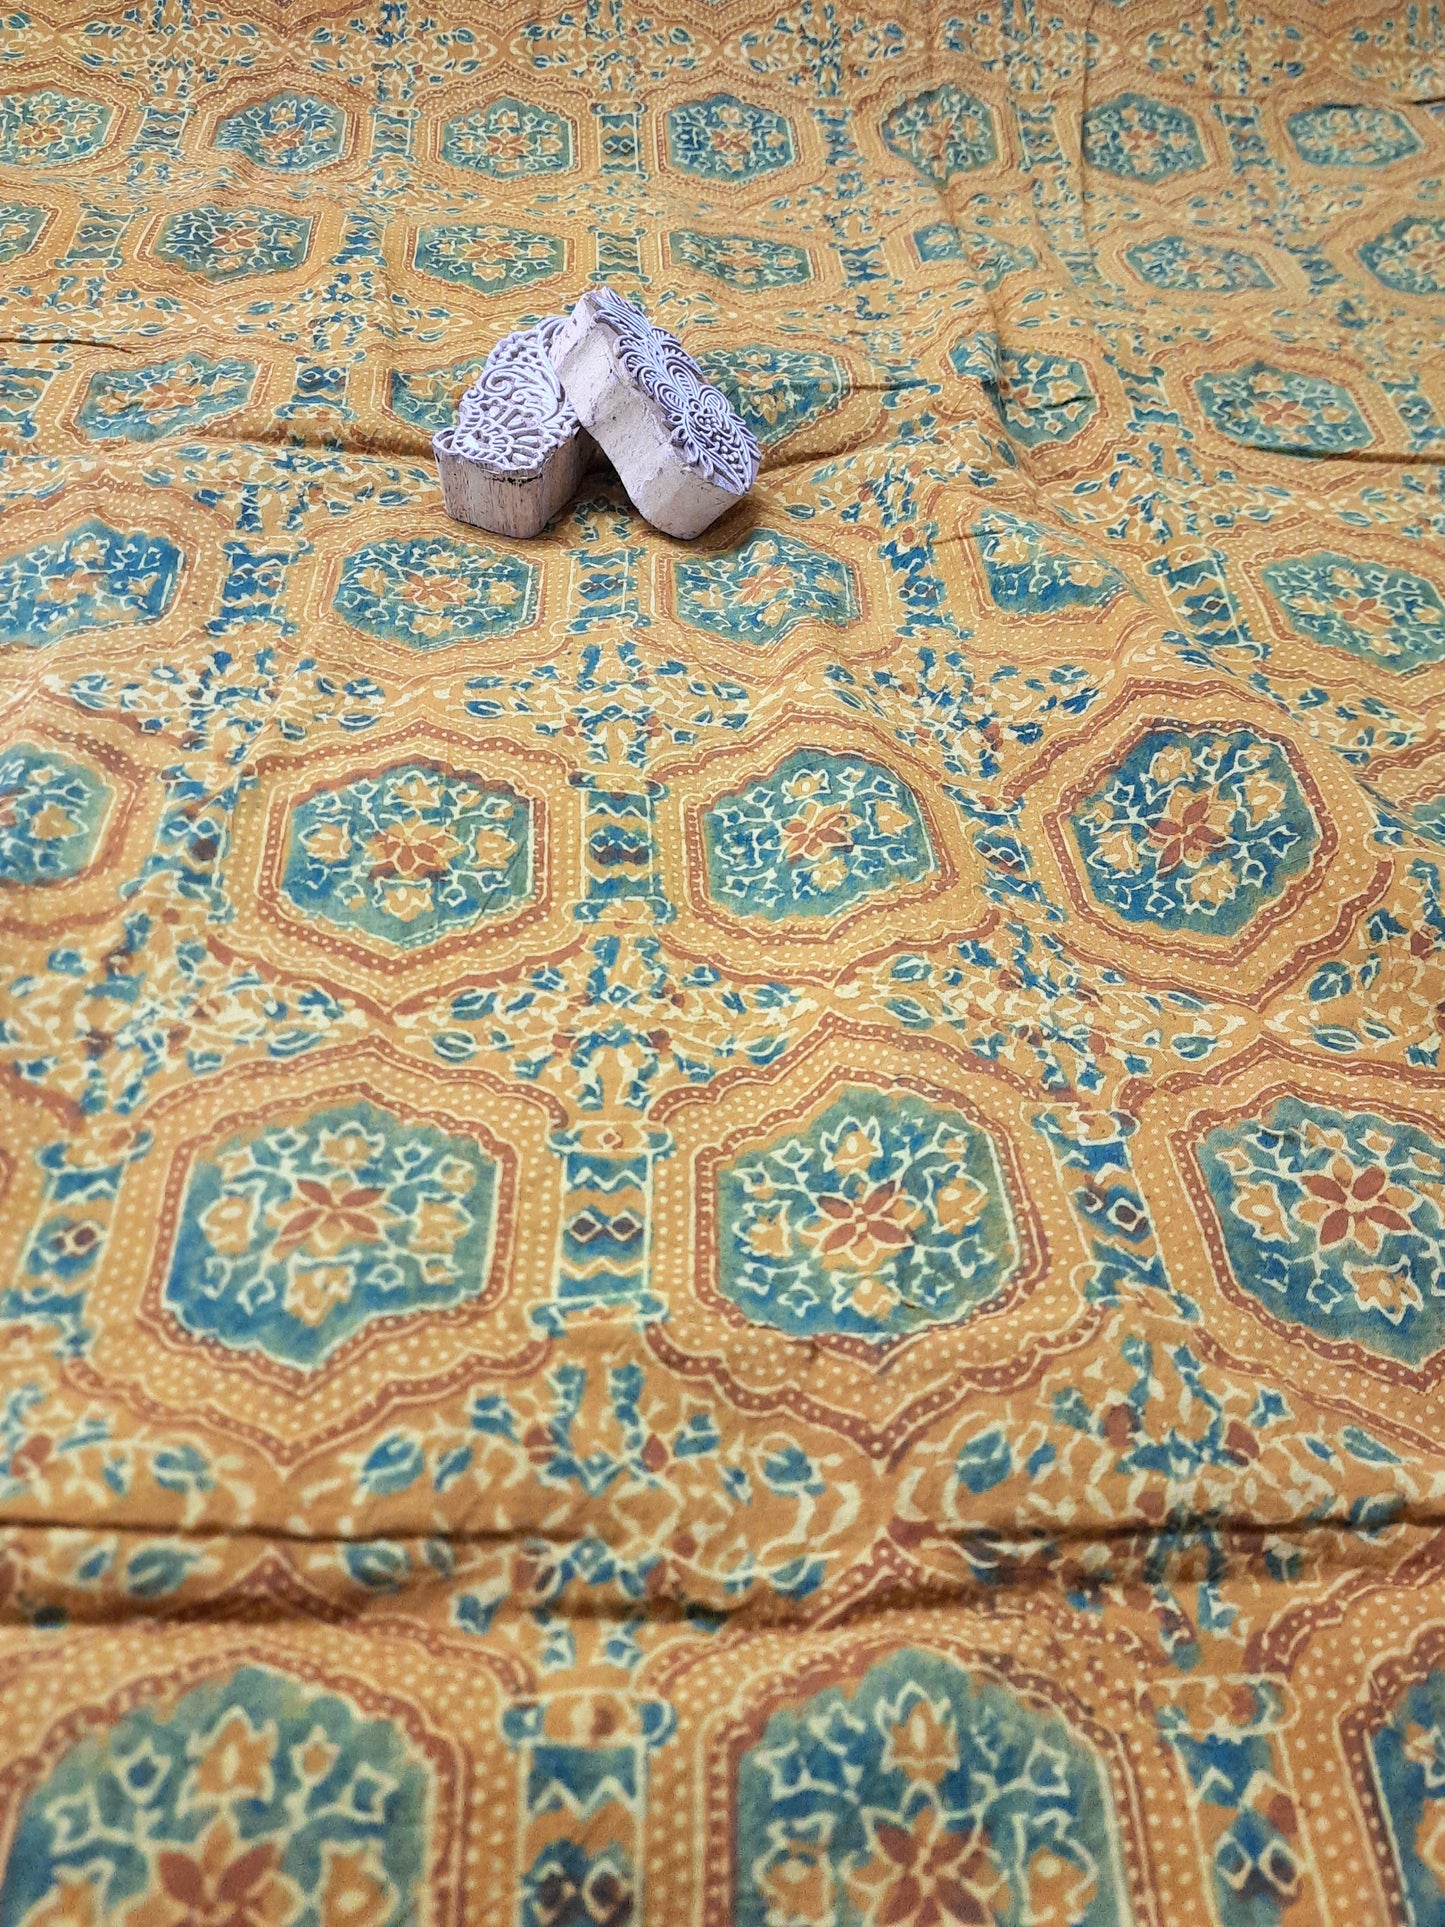 "Image: Turmeric Dyed Pure Cotton Fabric with Ajrakh hand block prints by Turquoisethestore, showcasing vibrant natural hues and intricate designs."